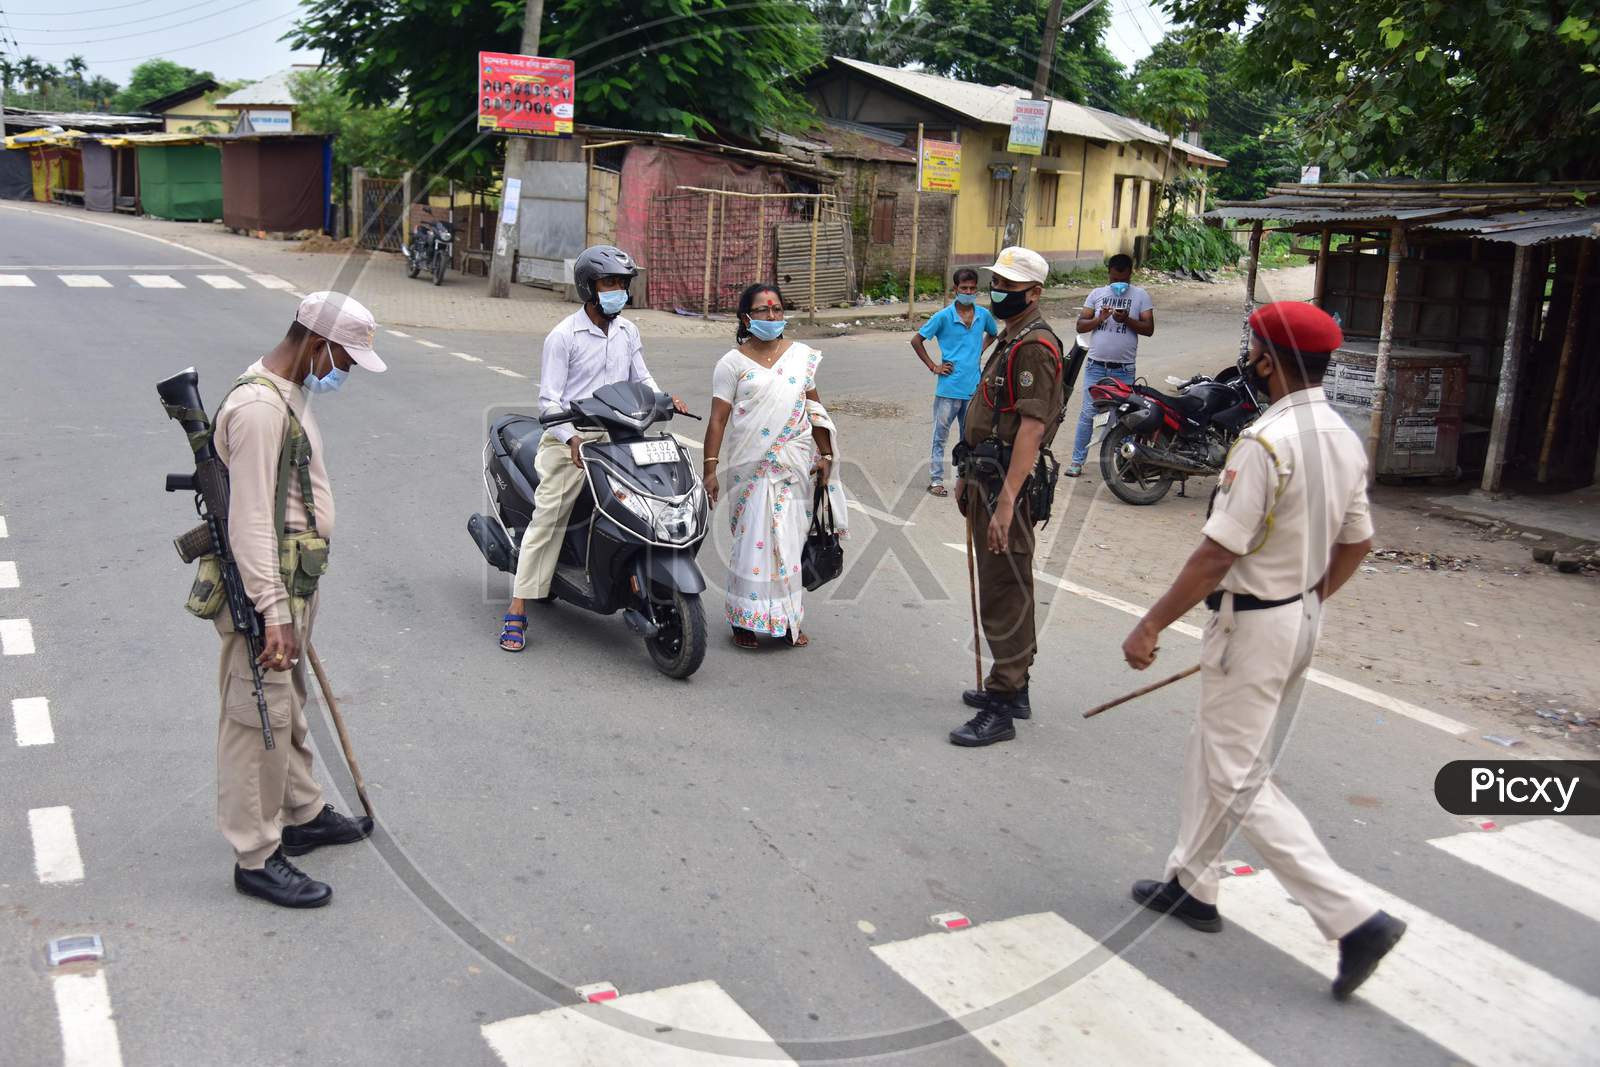 Security personnel question commuters who defied the curfew imposed during the lockdown by the Assam government to control the spread of the coronavirus in Nagaon, Assam on July 04, 2020